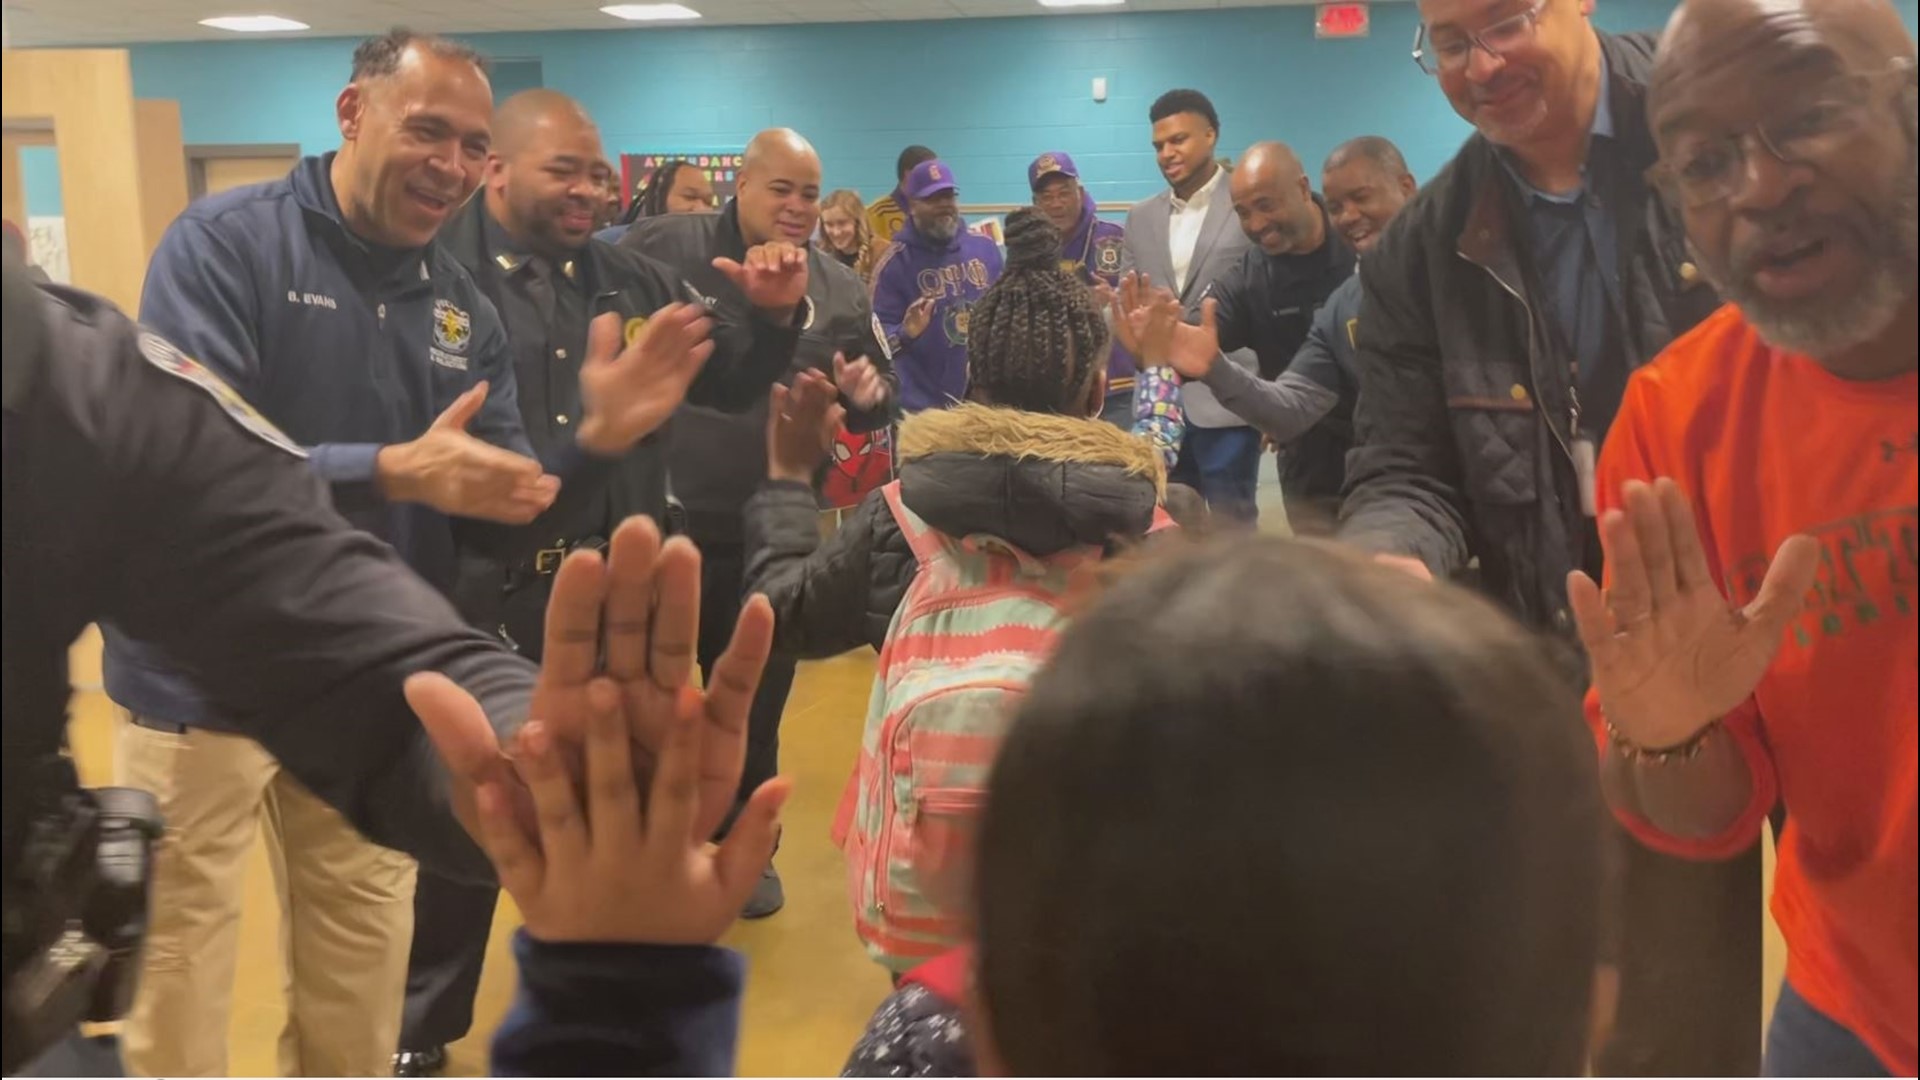 About 50 men took part in the Wednesday surprise for students at Indian Trails Elementary.